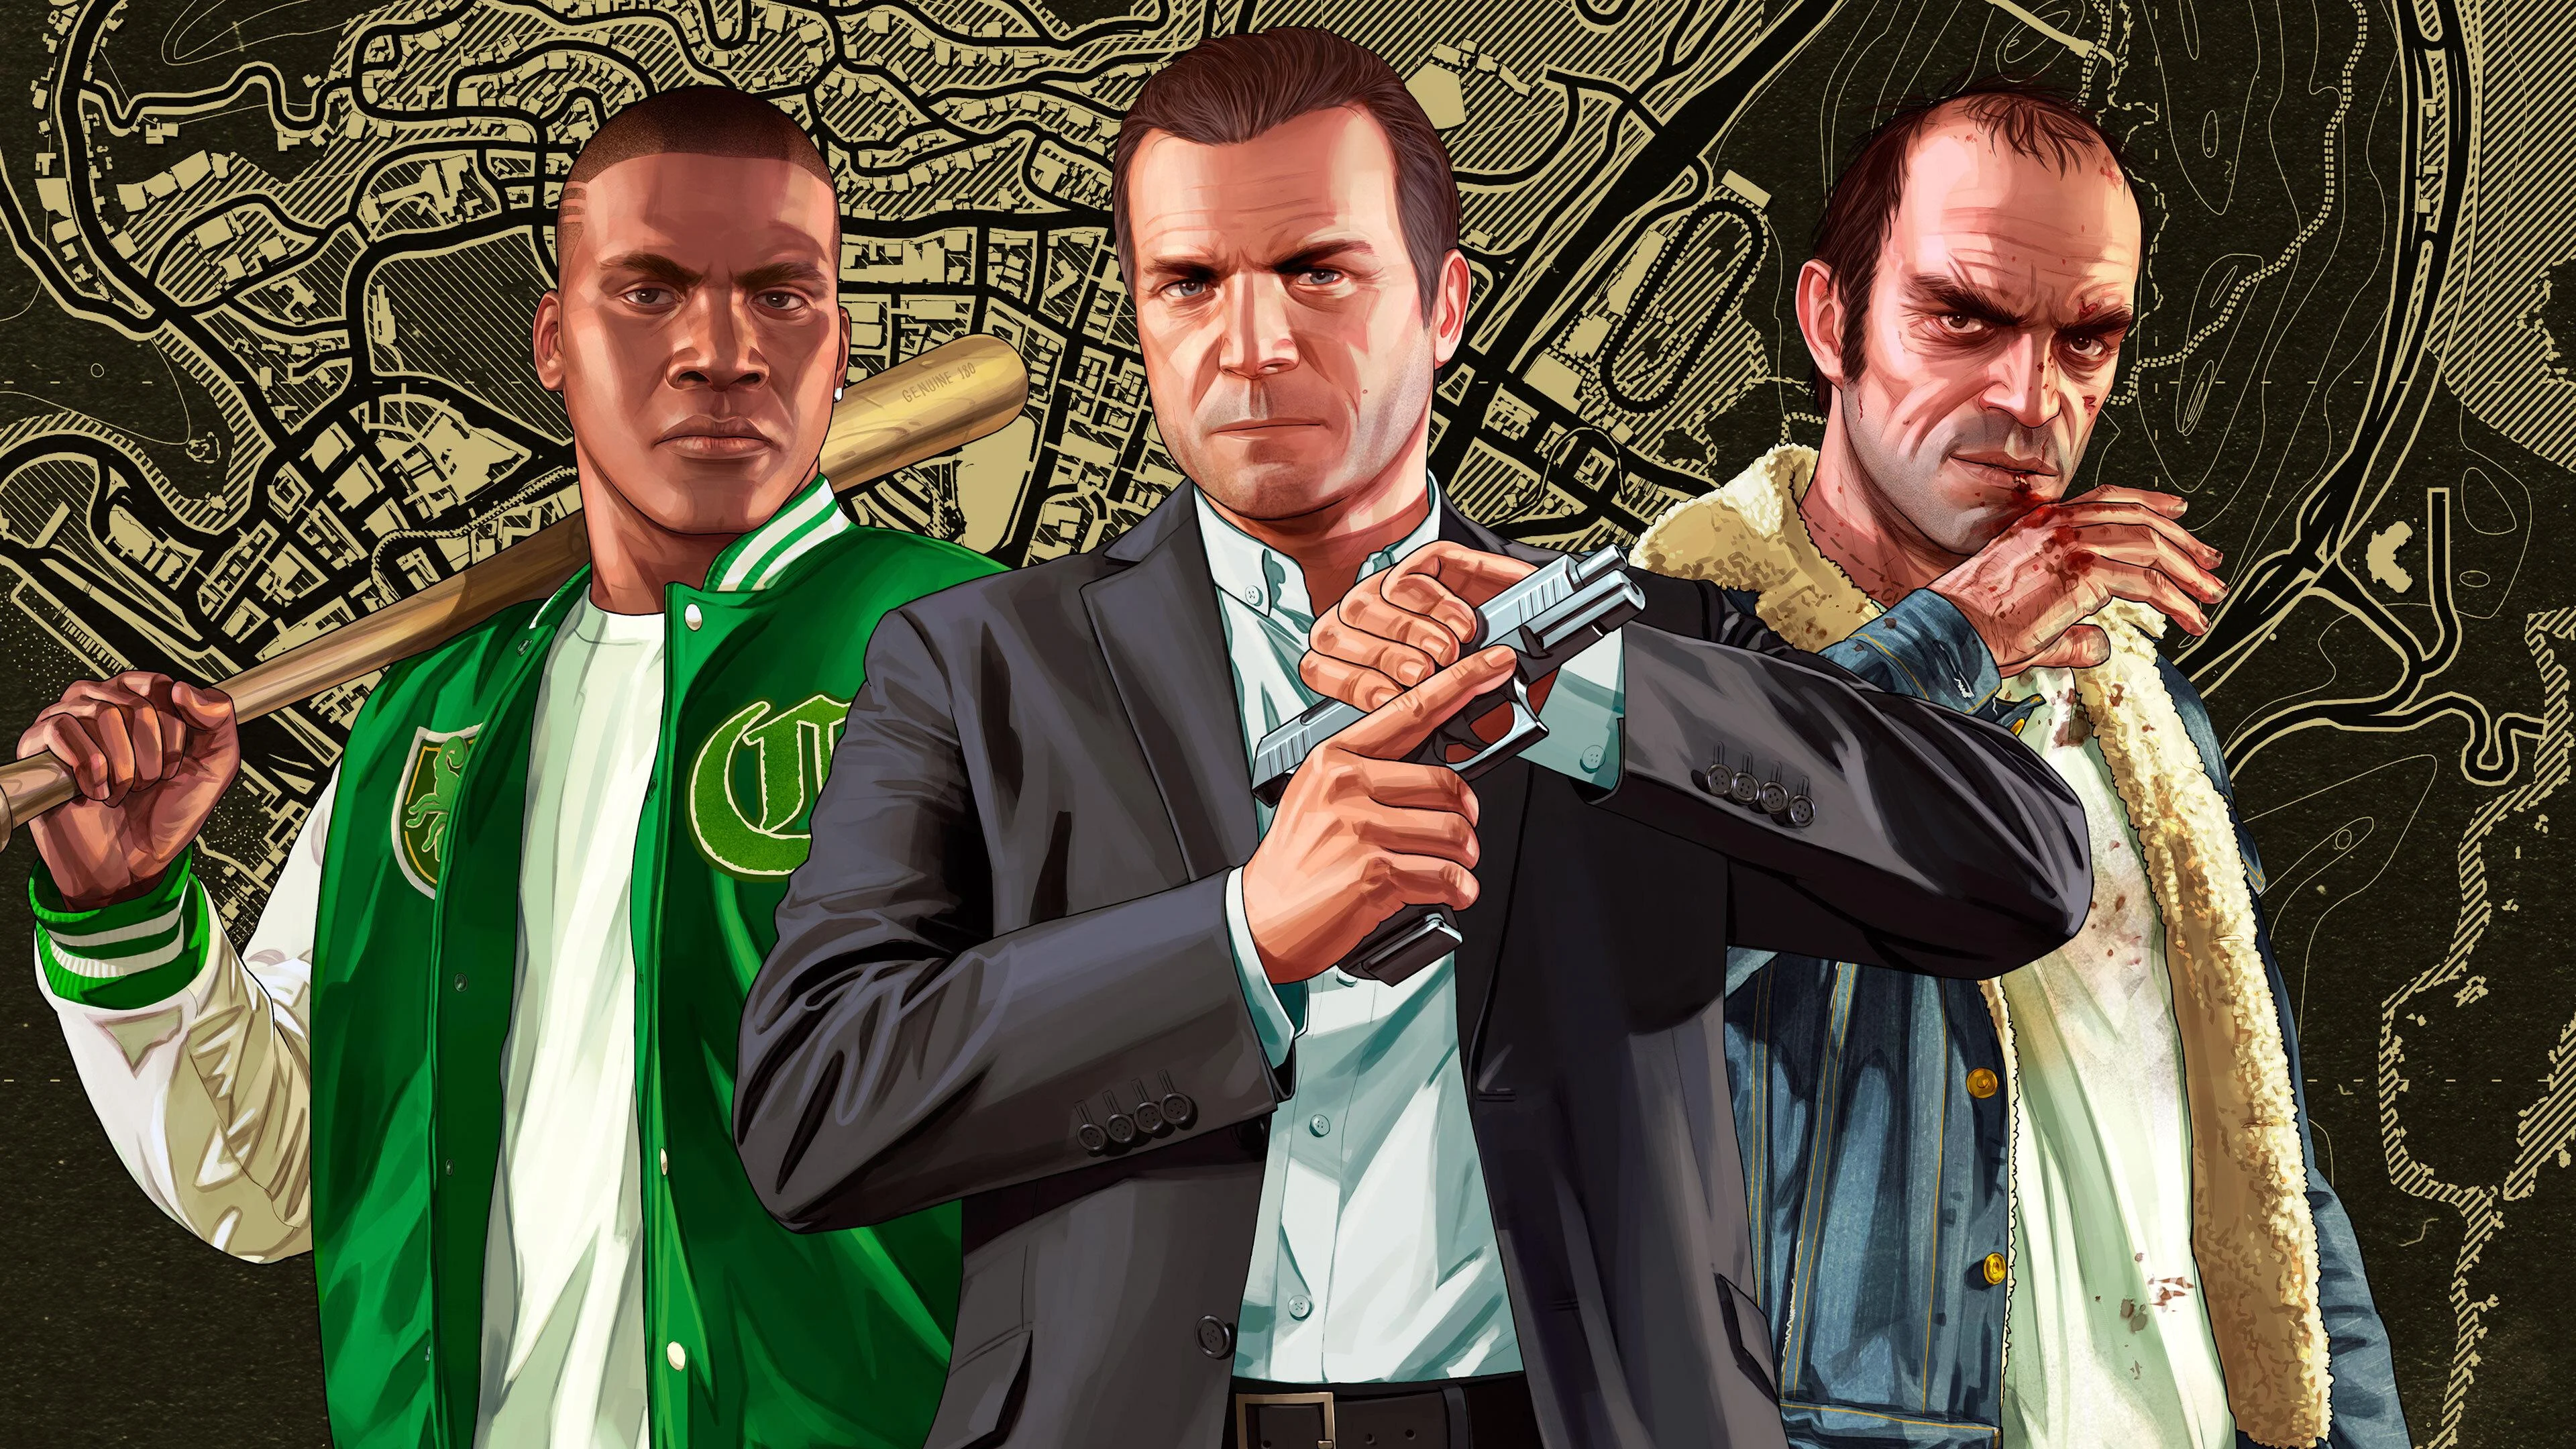 Rockstar Games are no longer available on Windows 7 and 8